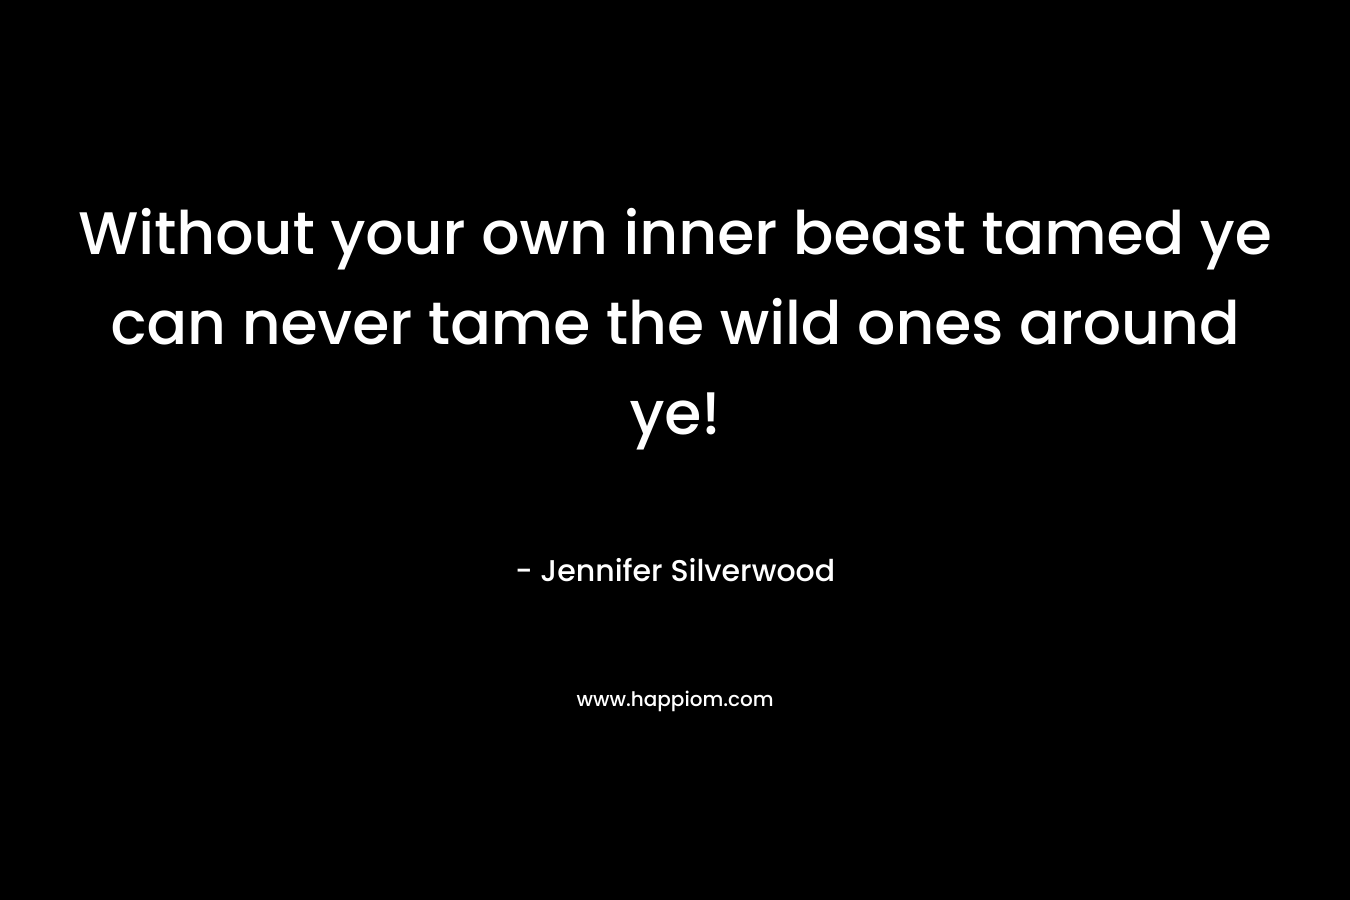 Without your own inner beast tamed ye can never tame the wild ones around ye! – Jennifer Silverwood